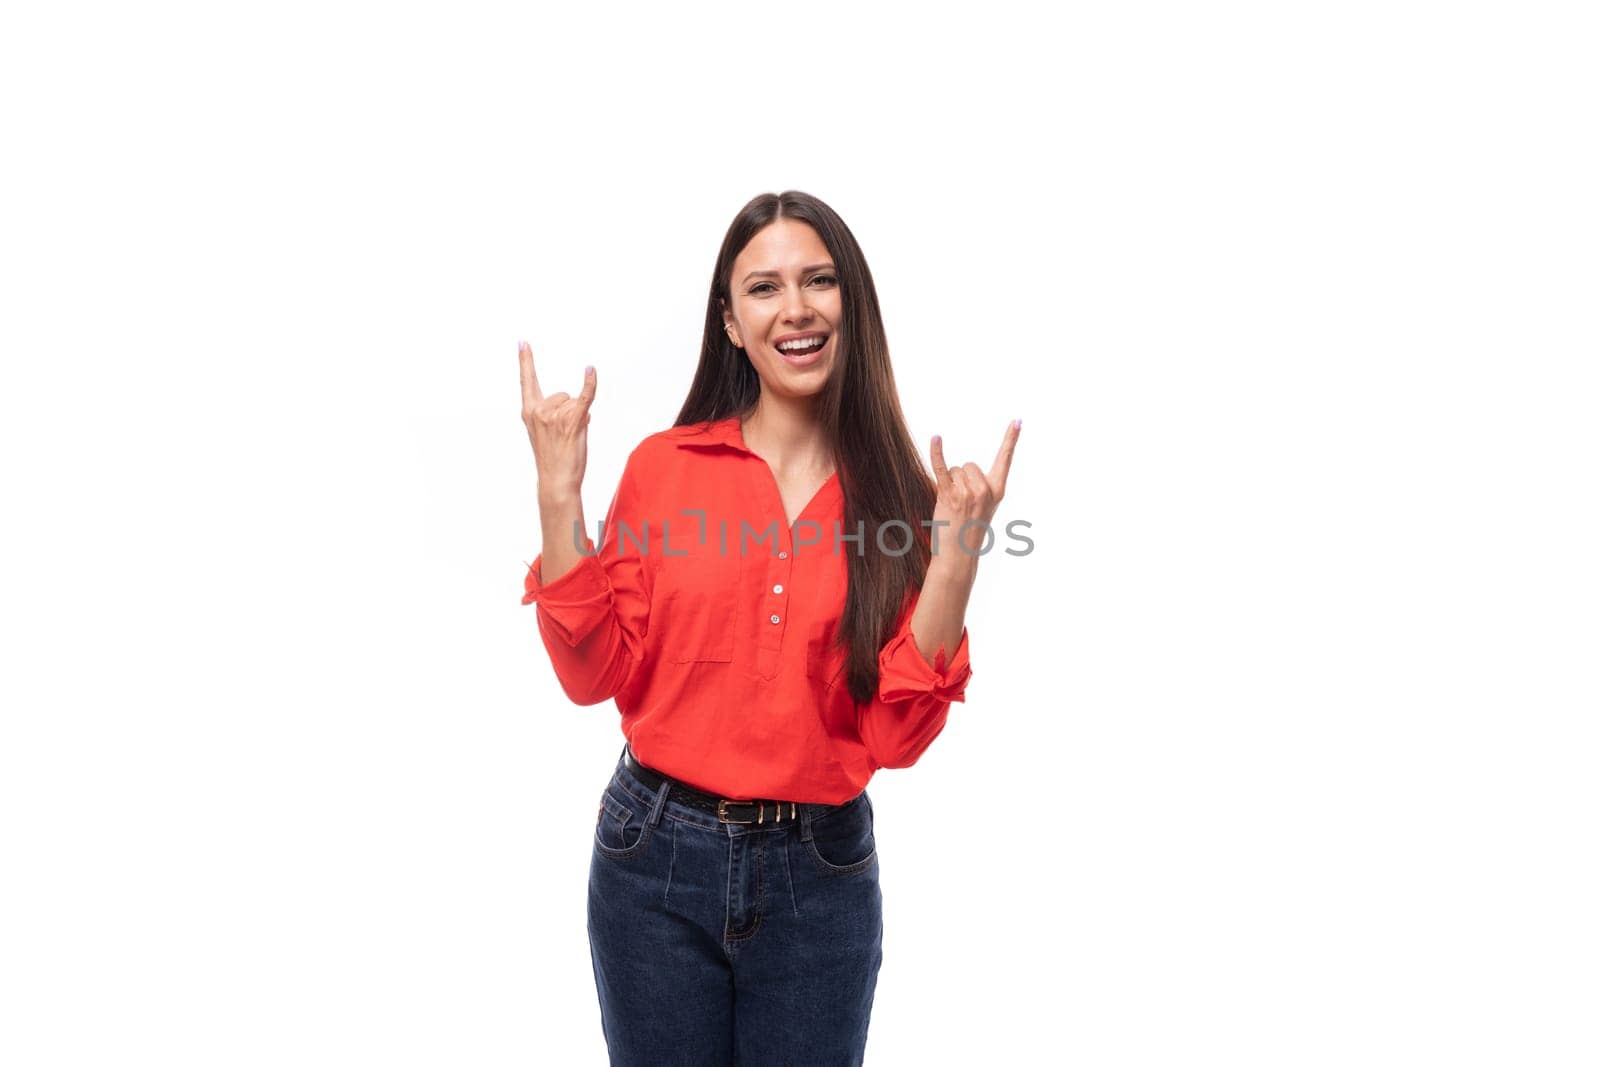 young office worker woman with black hair is dressed in a red blouse tucked into trousers on a white background by TRMK